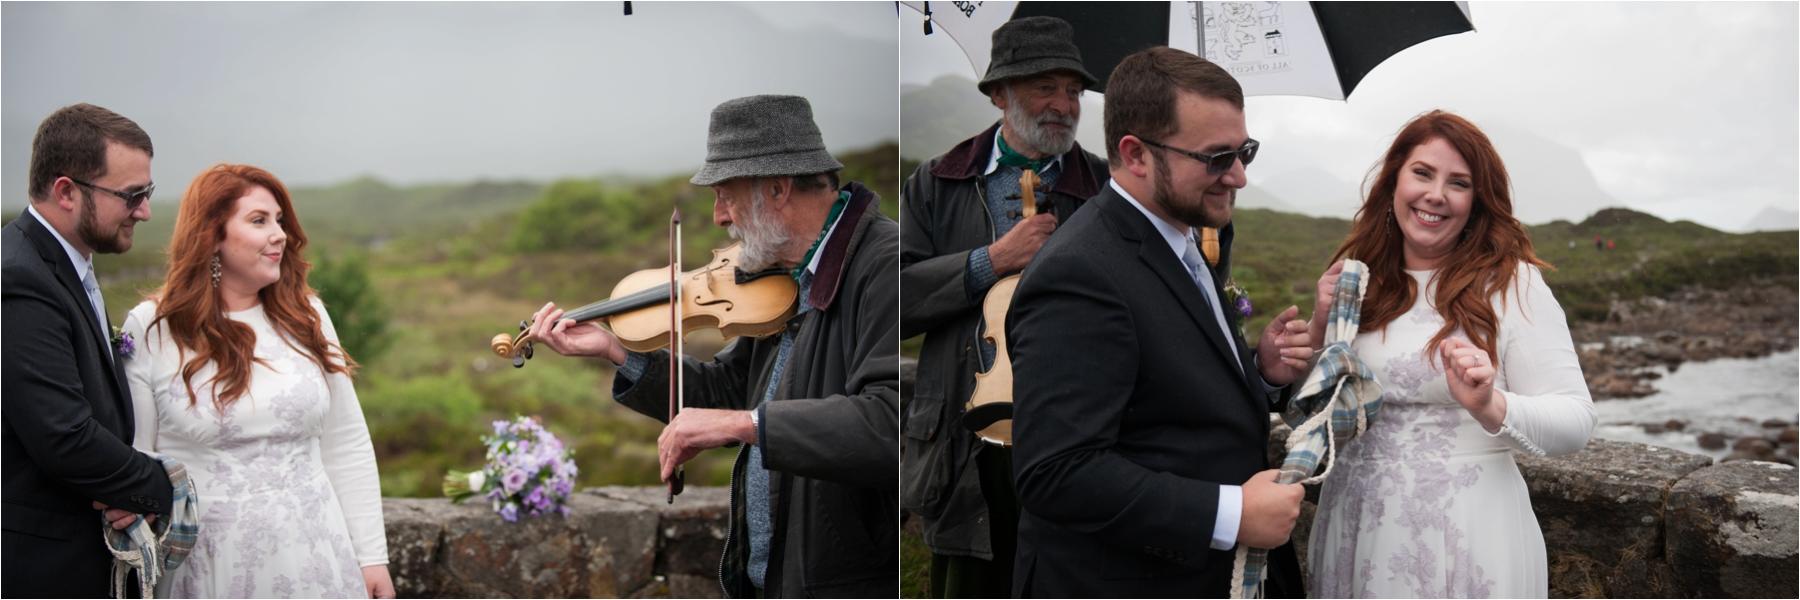 A fiddler plays a requested song from the bride during their outdoor ceremony in the Scottish Highlands. The ceremony took place on the old bridge at Sligachan on the Isle of Skye. 